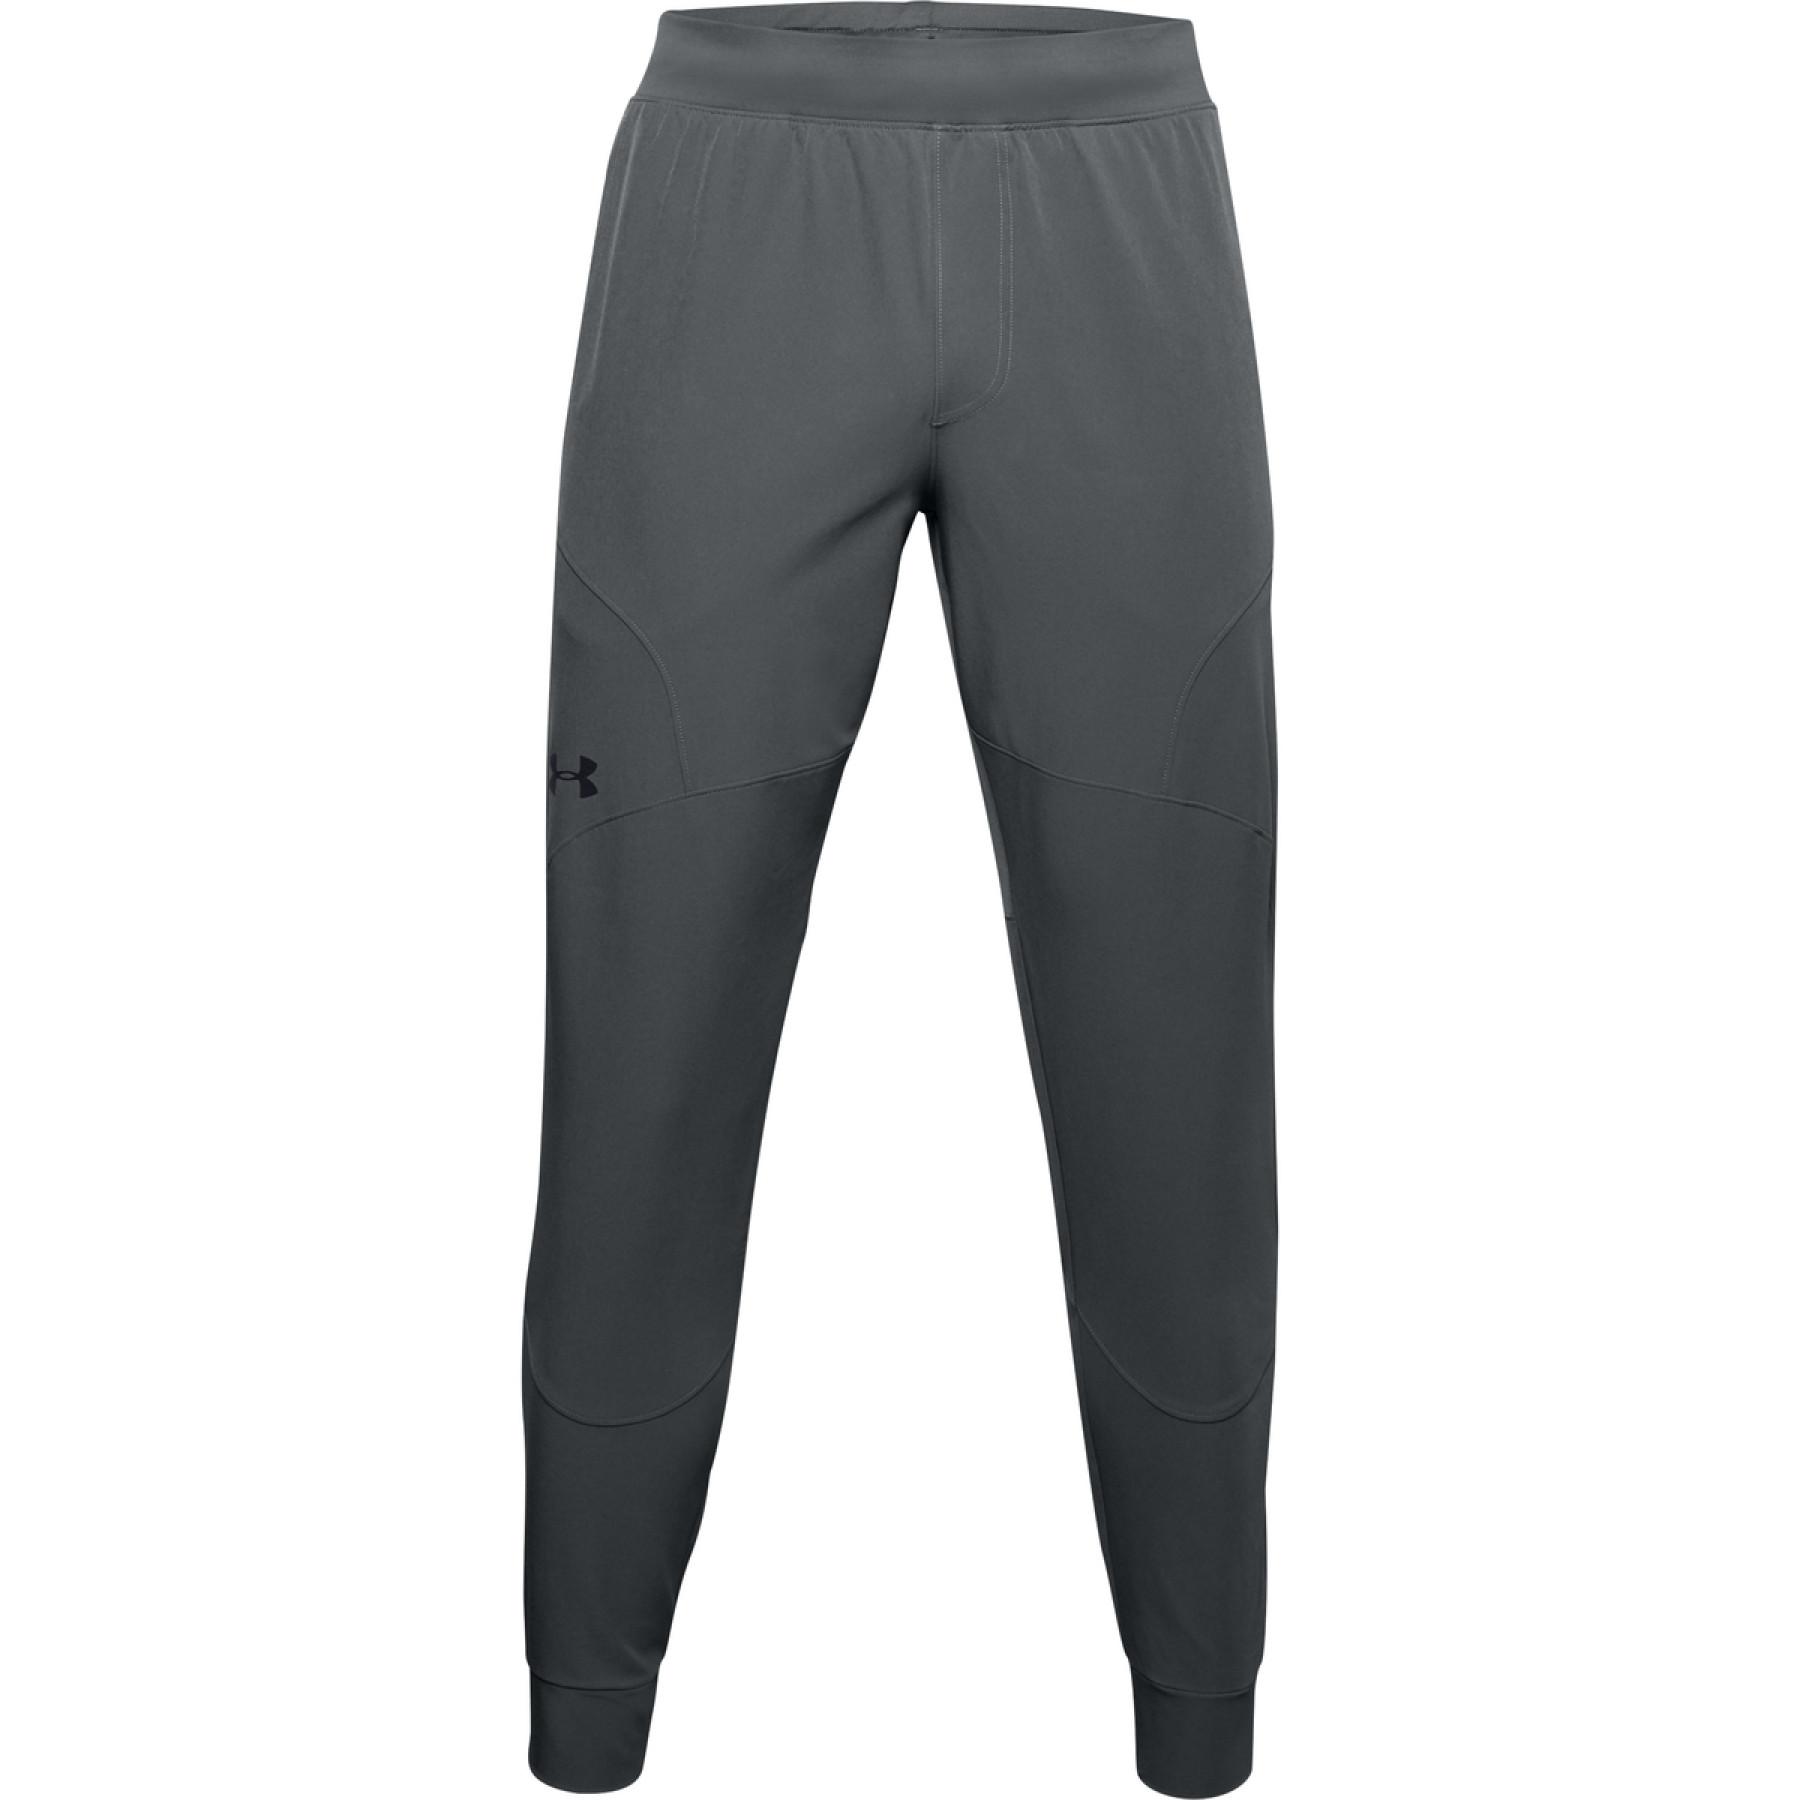 Under Armour Curry UNDRTD 3/4 Compression Tights Black/White